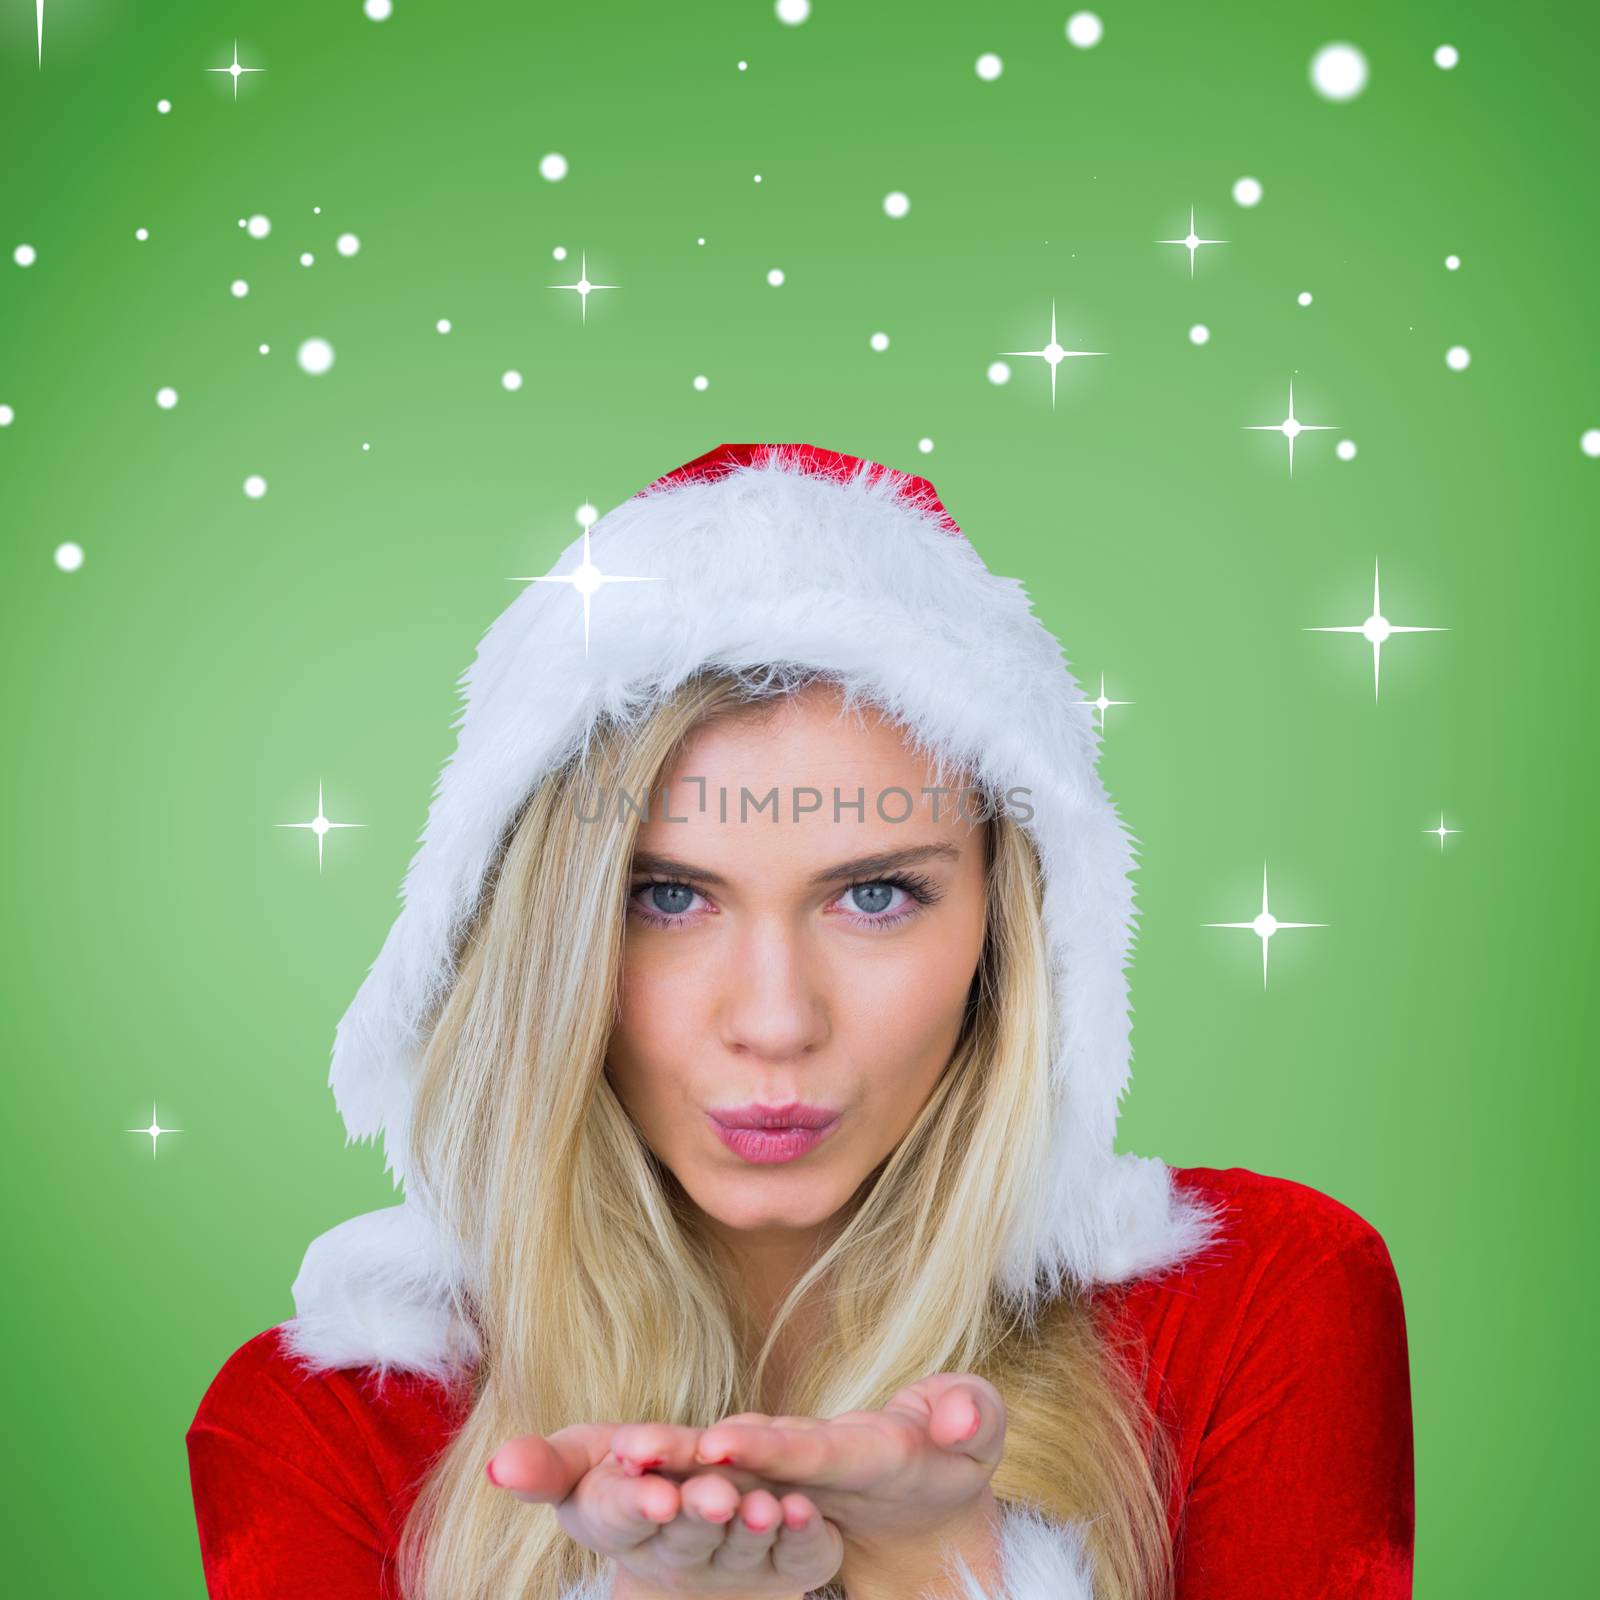 Pretty girl in santa outfit blowing against green vignette